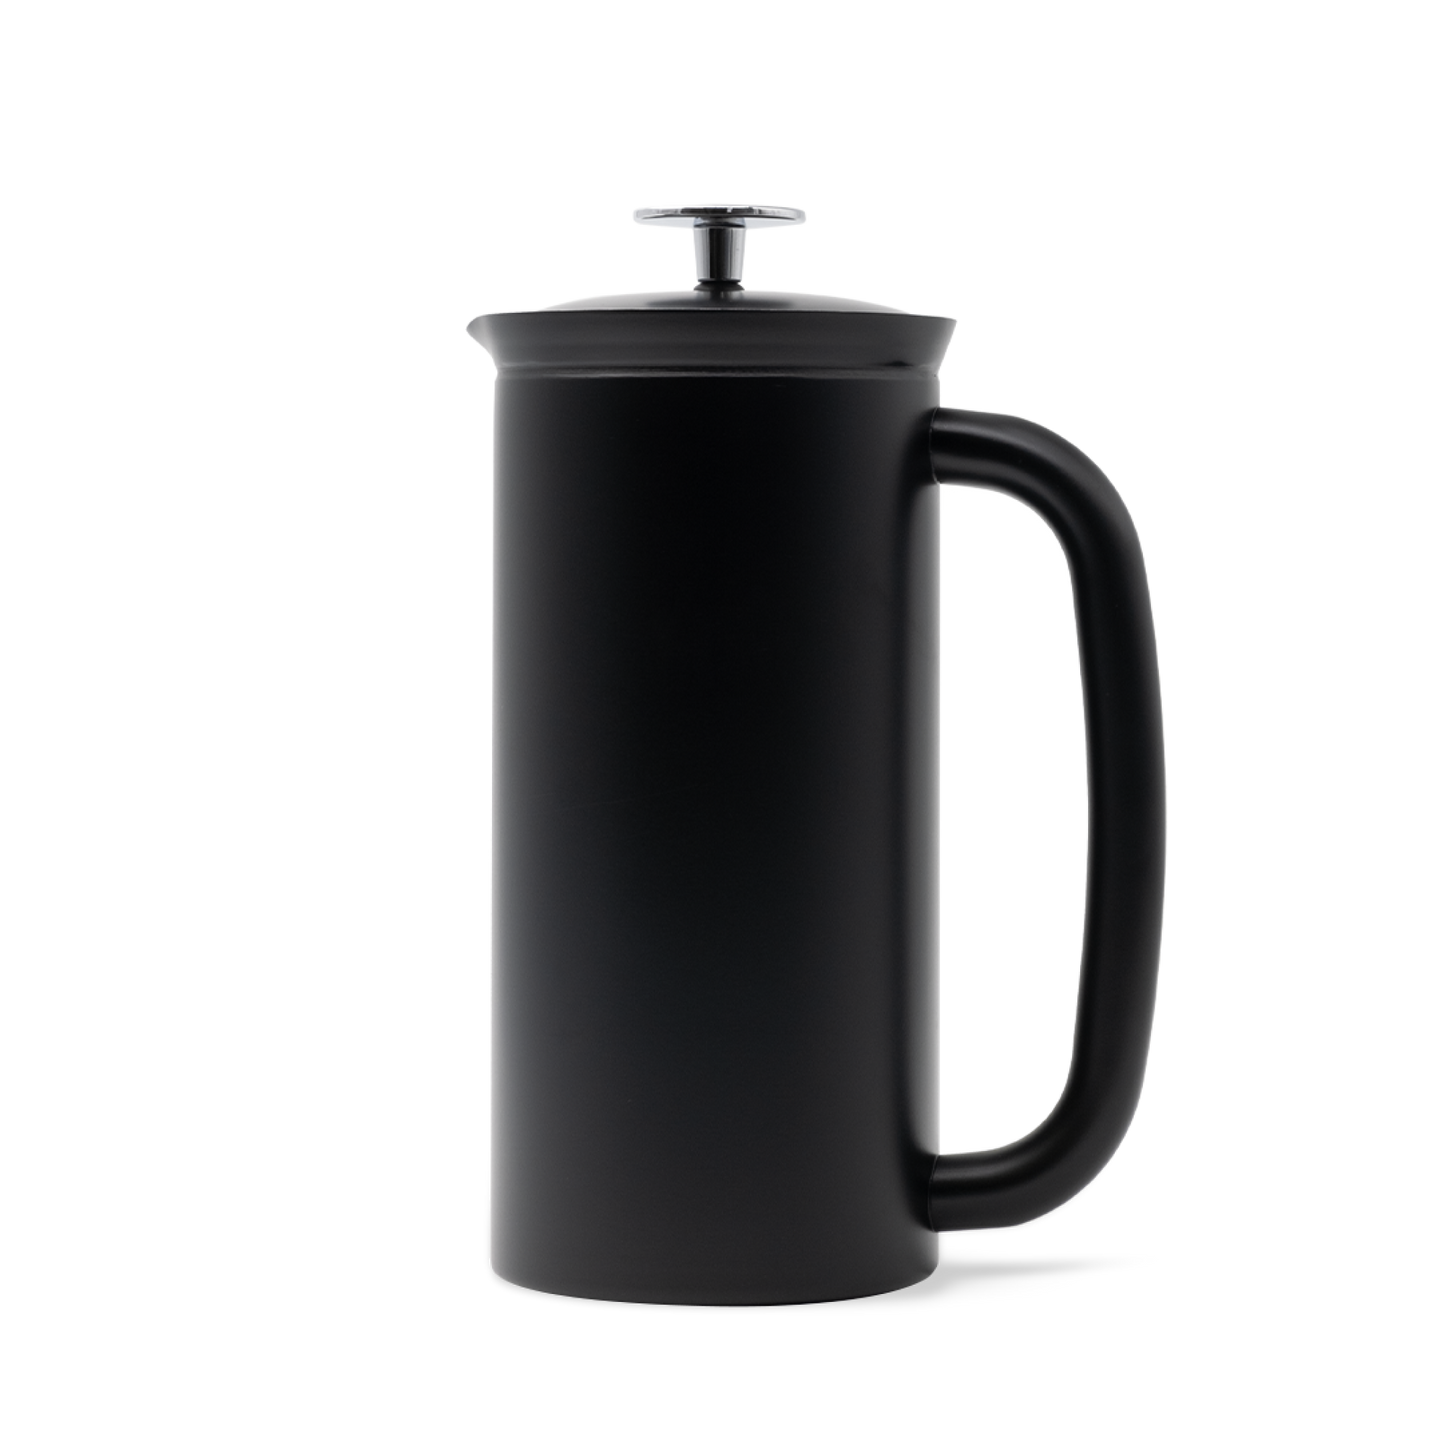 Espro P7 French press